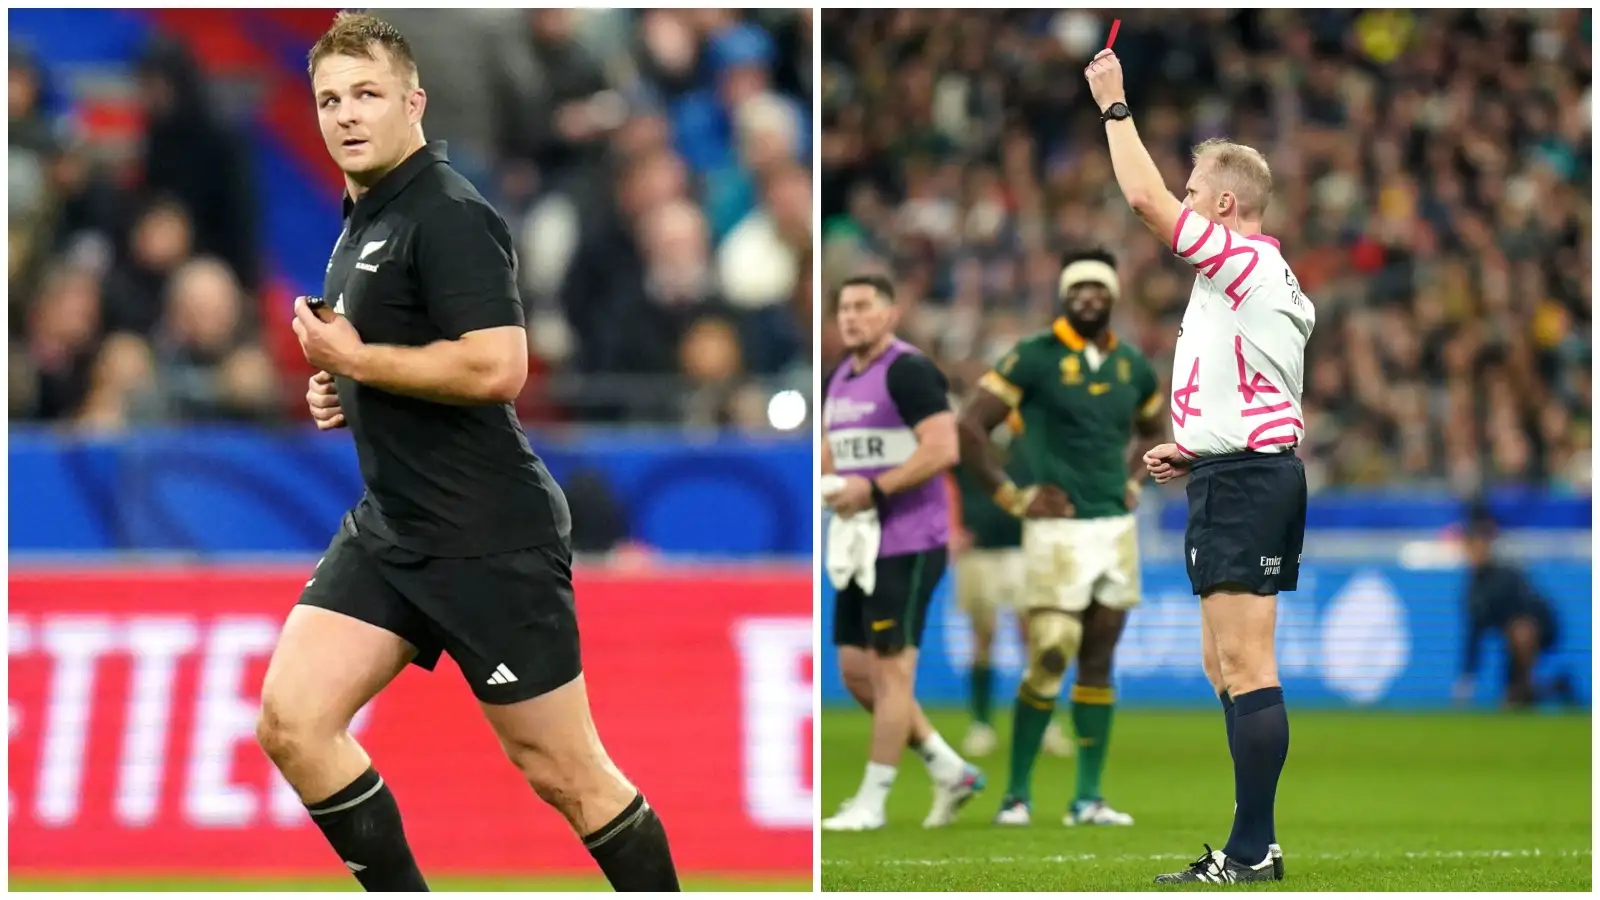 All Blacks captain Sam Cane gets red card in Rugby World Cup final.